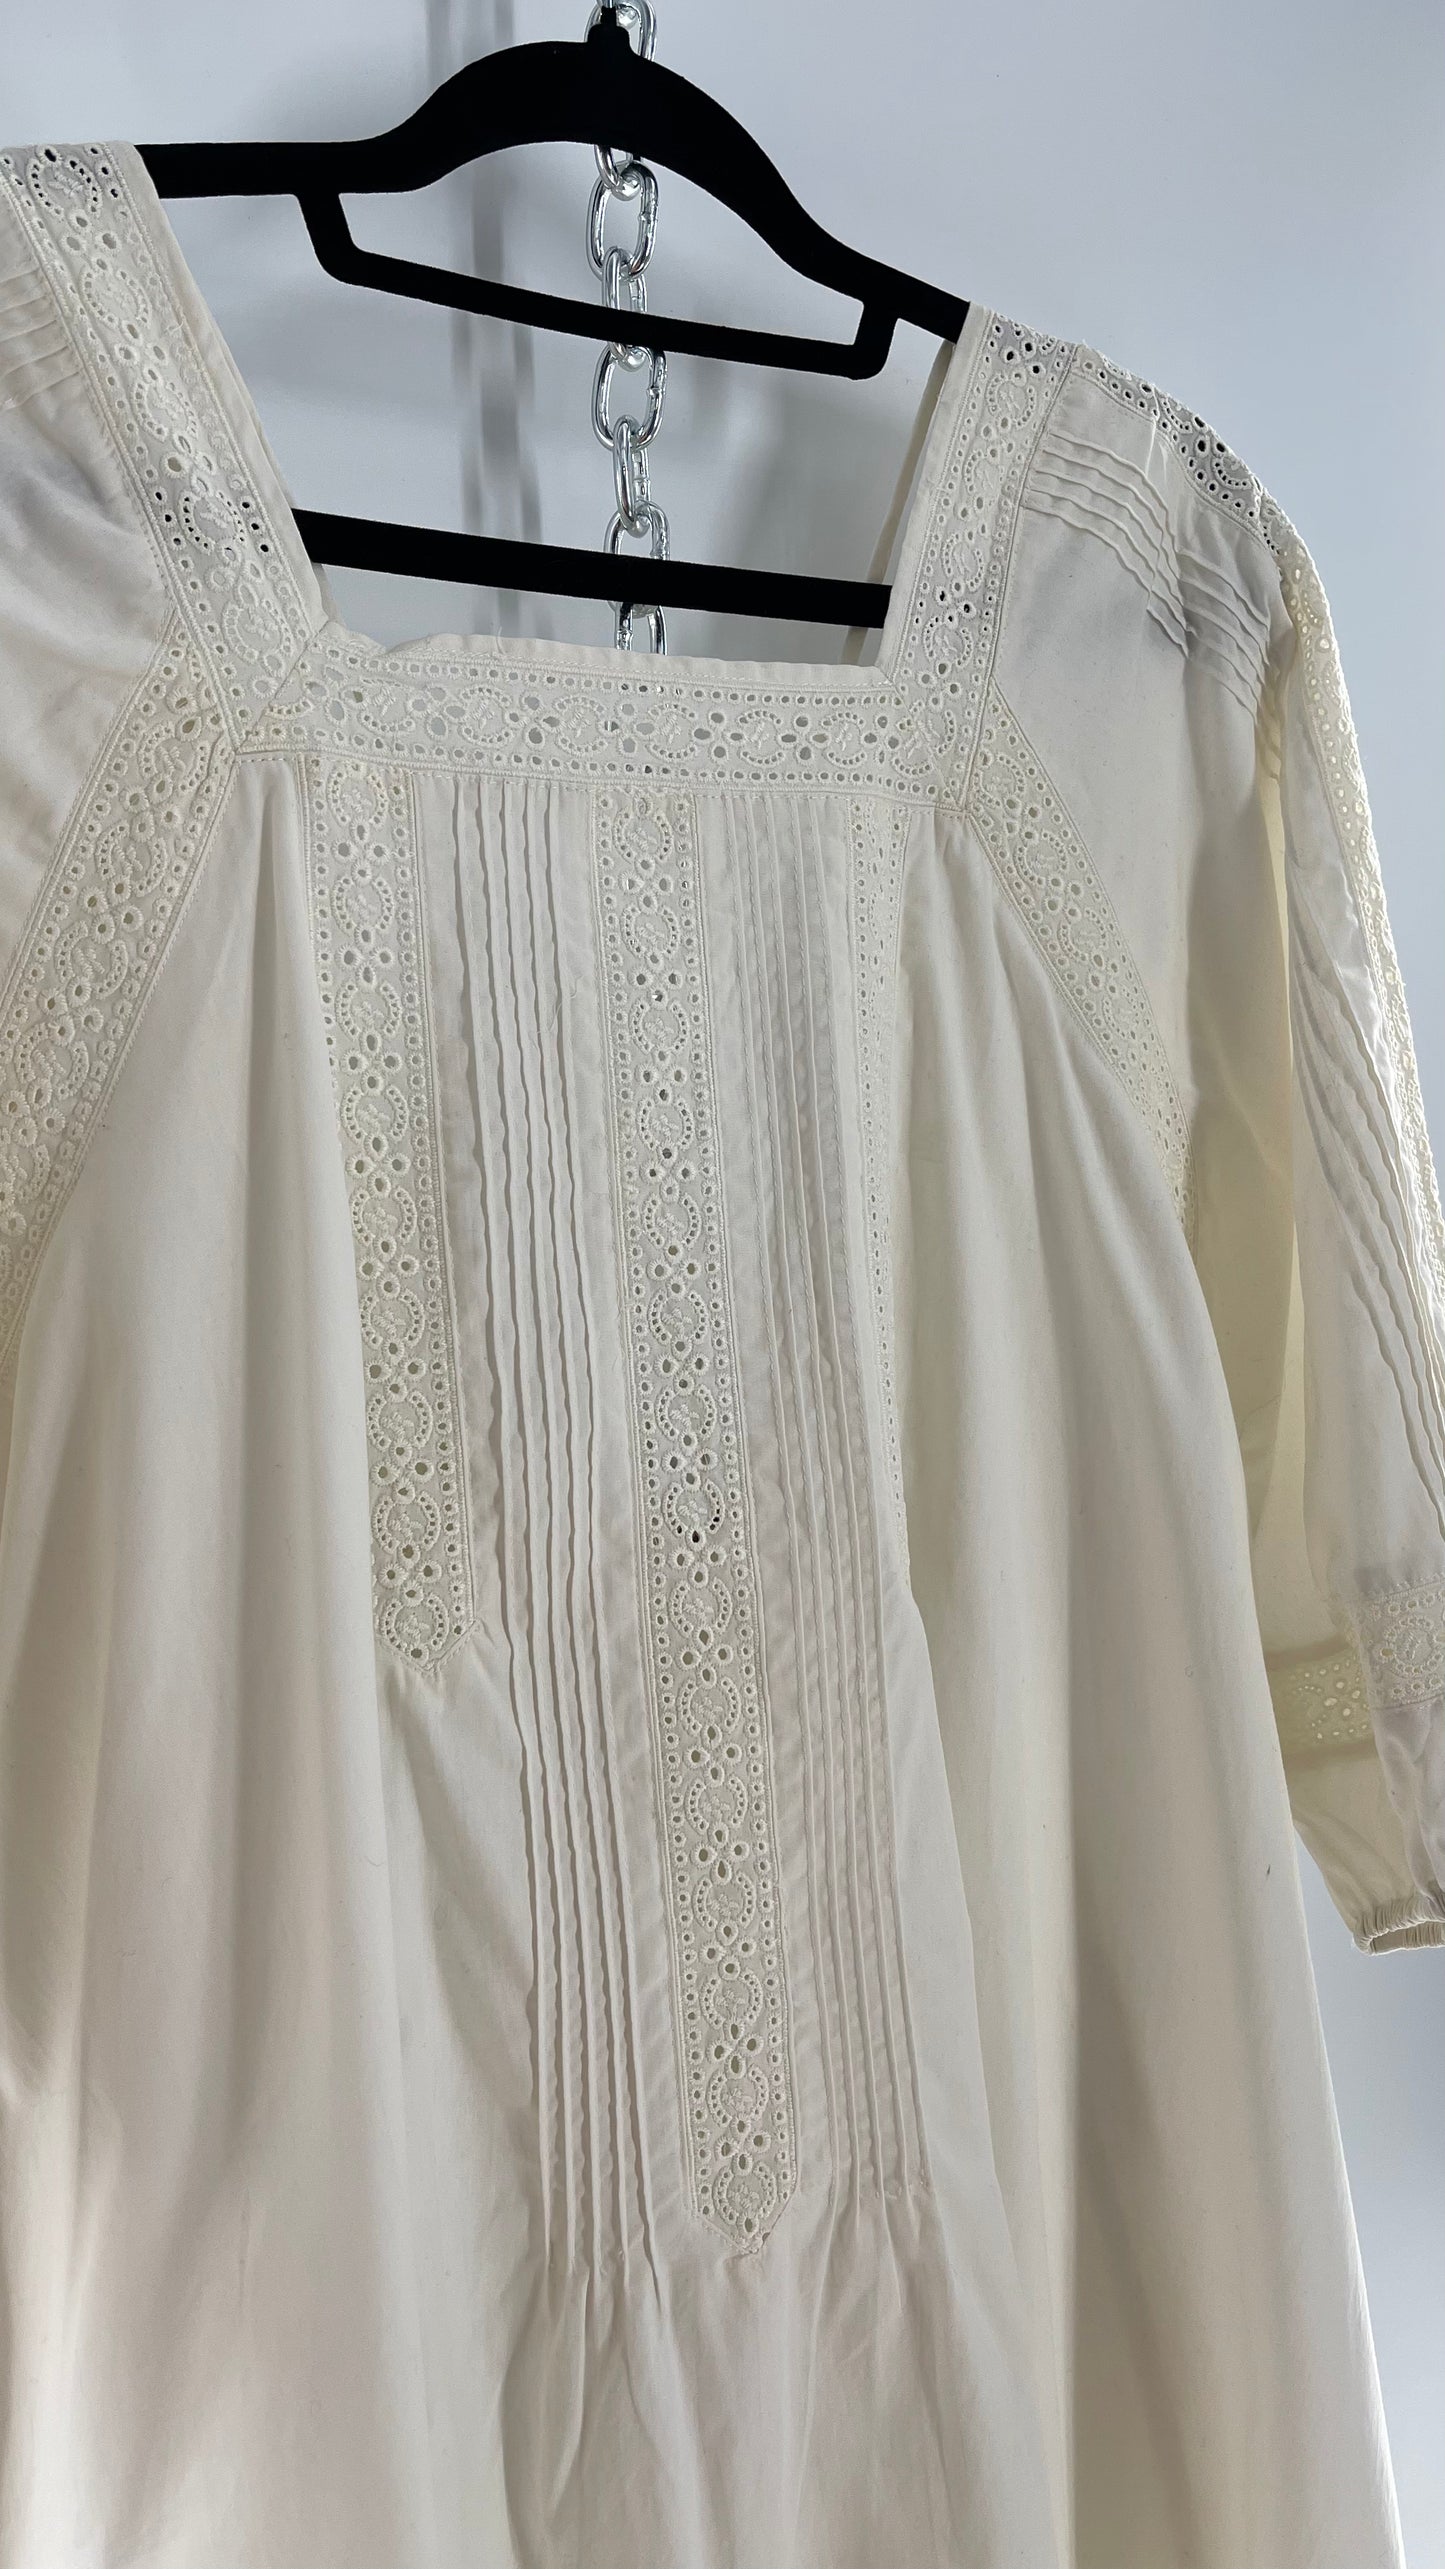 Free People White Long Sleeve Mini with Open Back and Lace Detailing (Small)